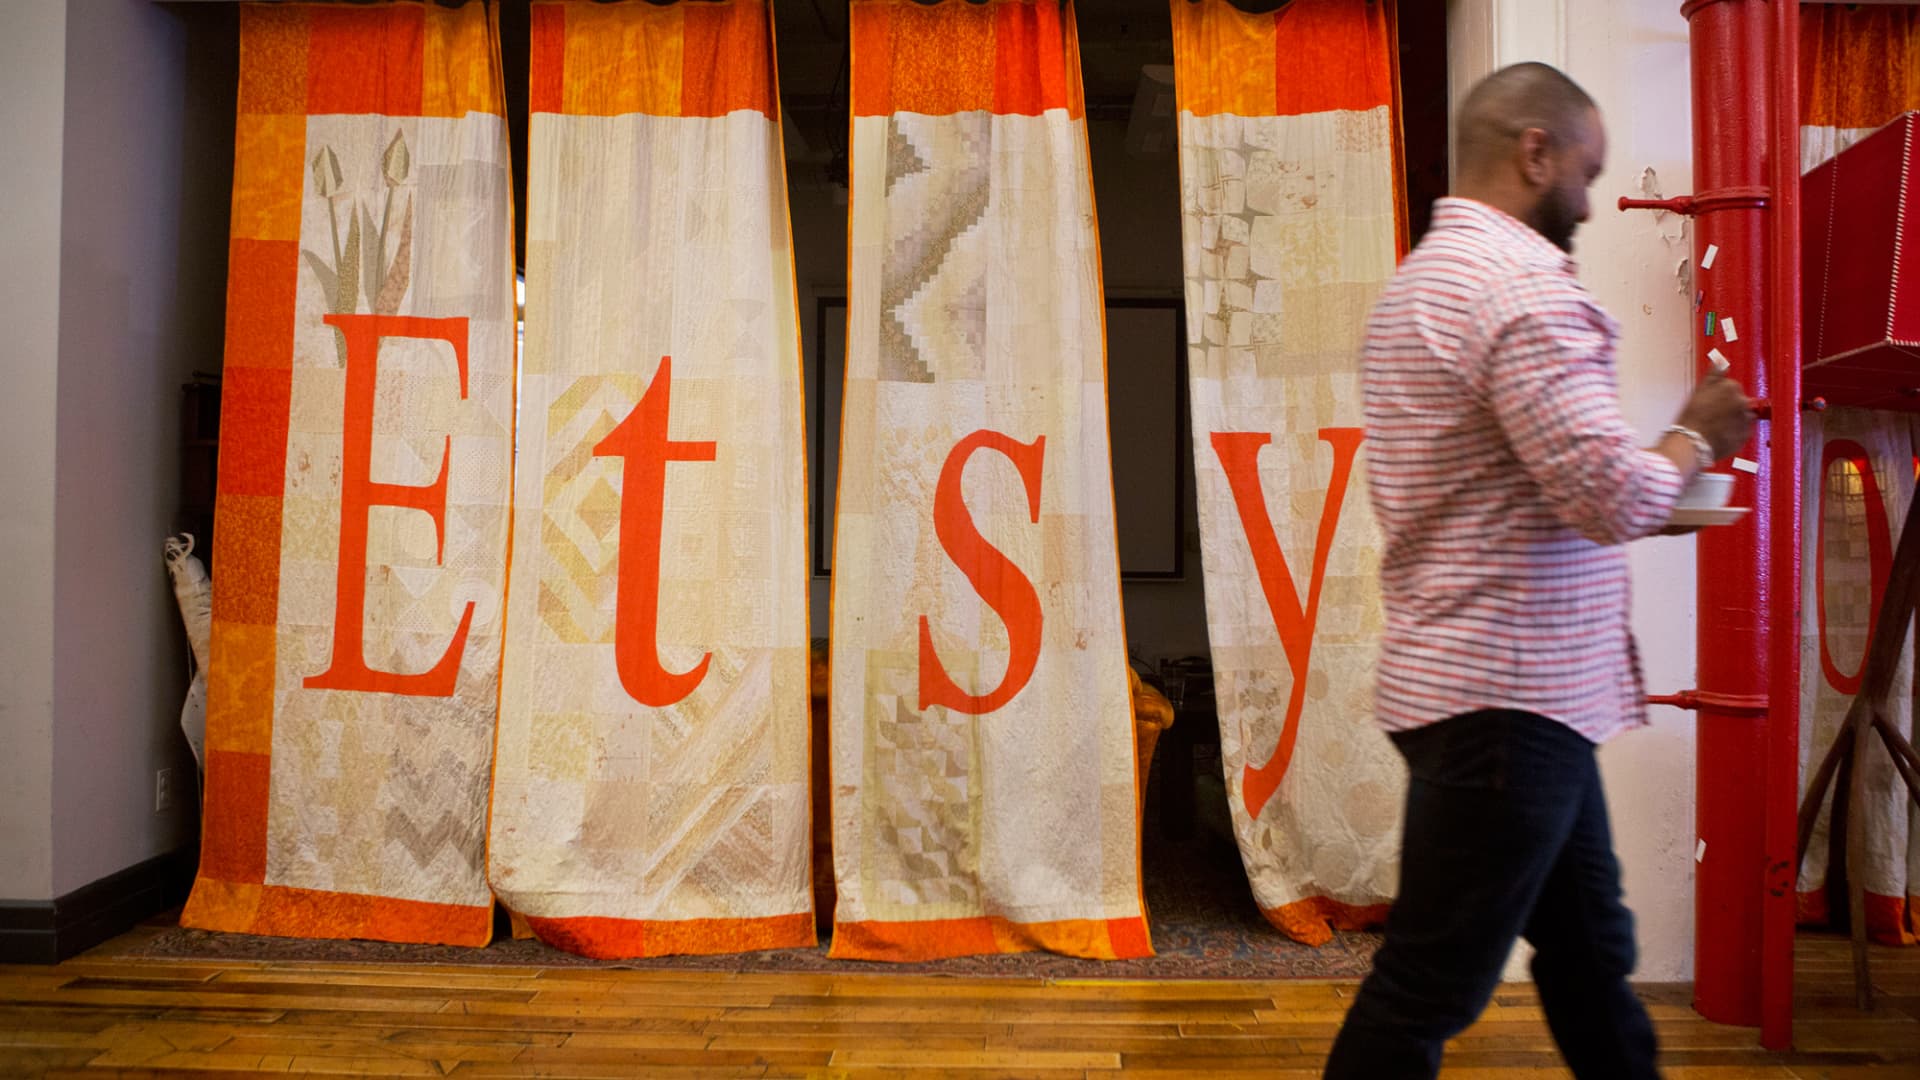 An employee walks past a quilt displaying Etsy signage at the company's headquarters in Brooklyn, New York.